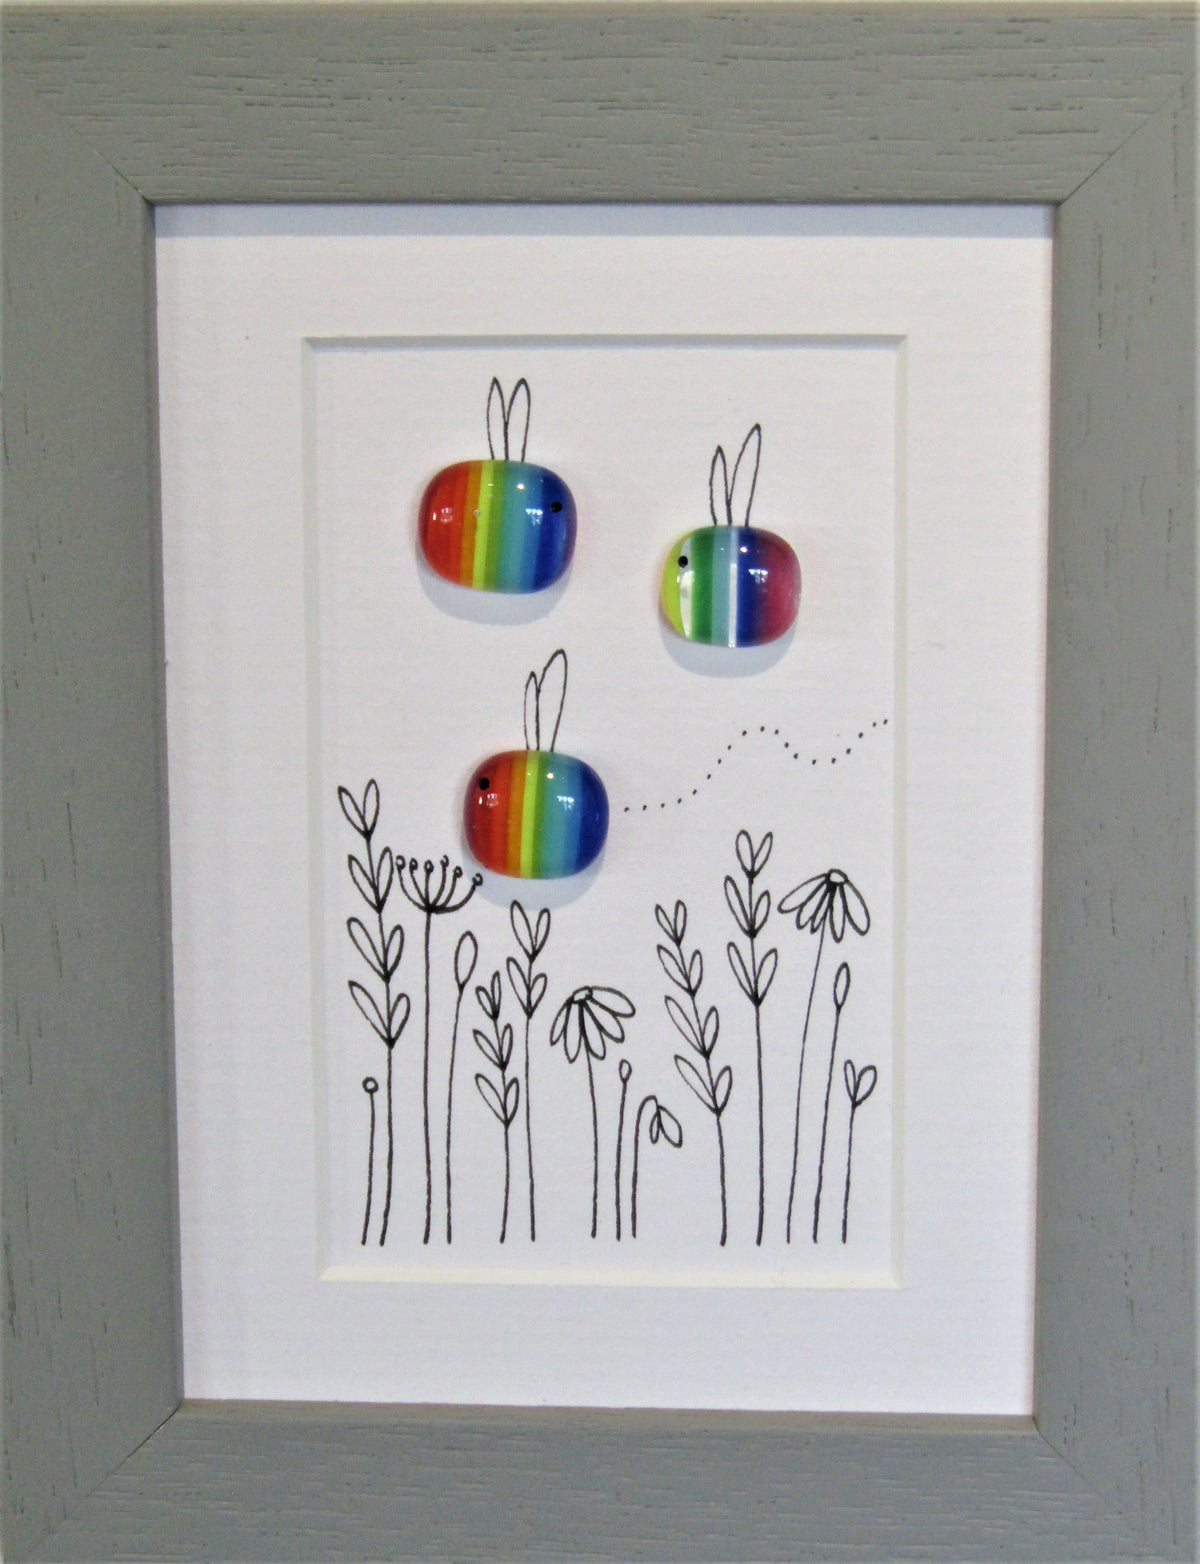 3 Rainbow Bees - Fused Glass and Illustration